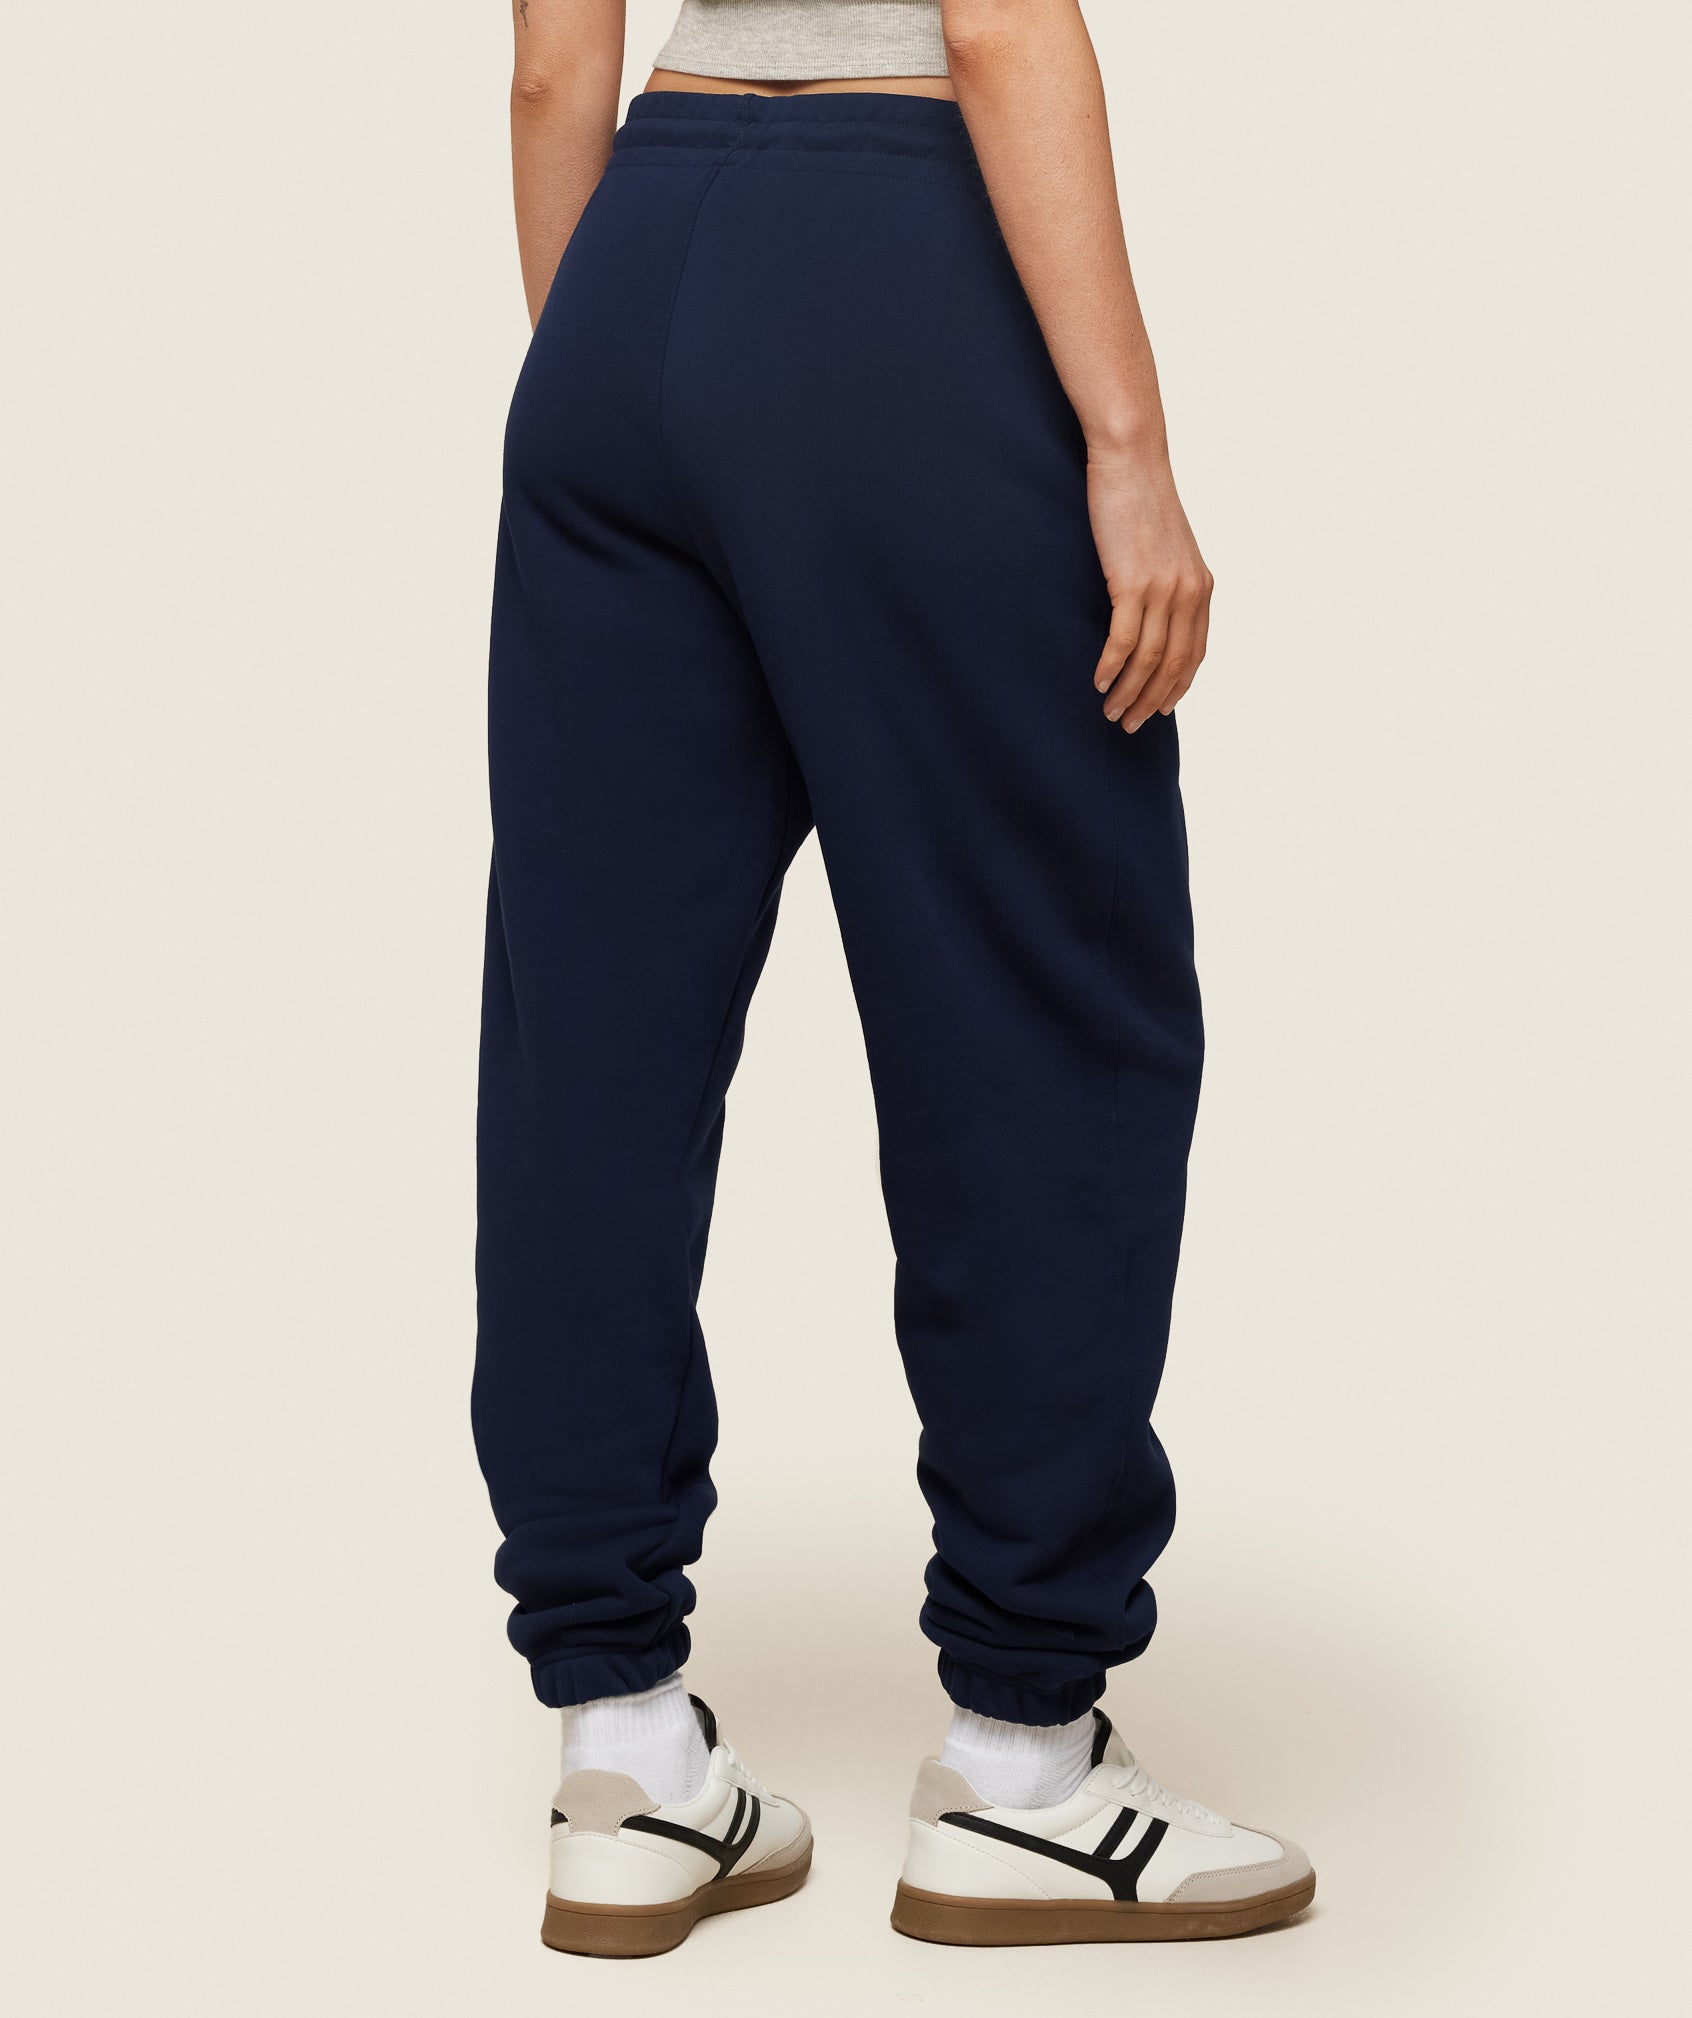 Phys Ed Graphic Sweatpants in Blue - view 4